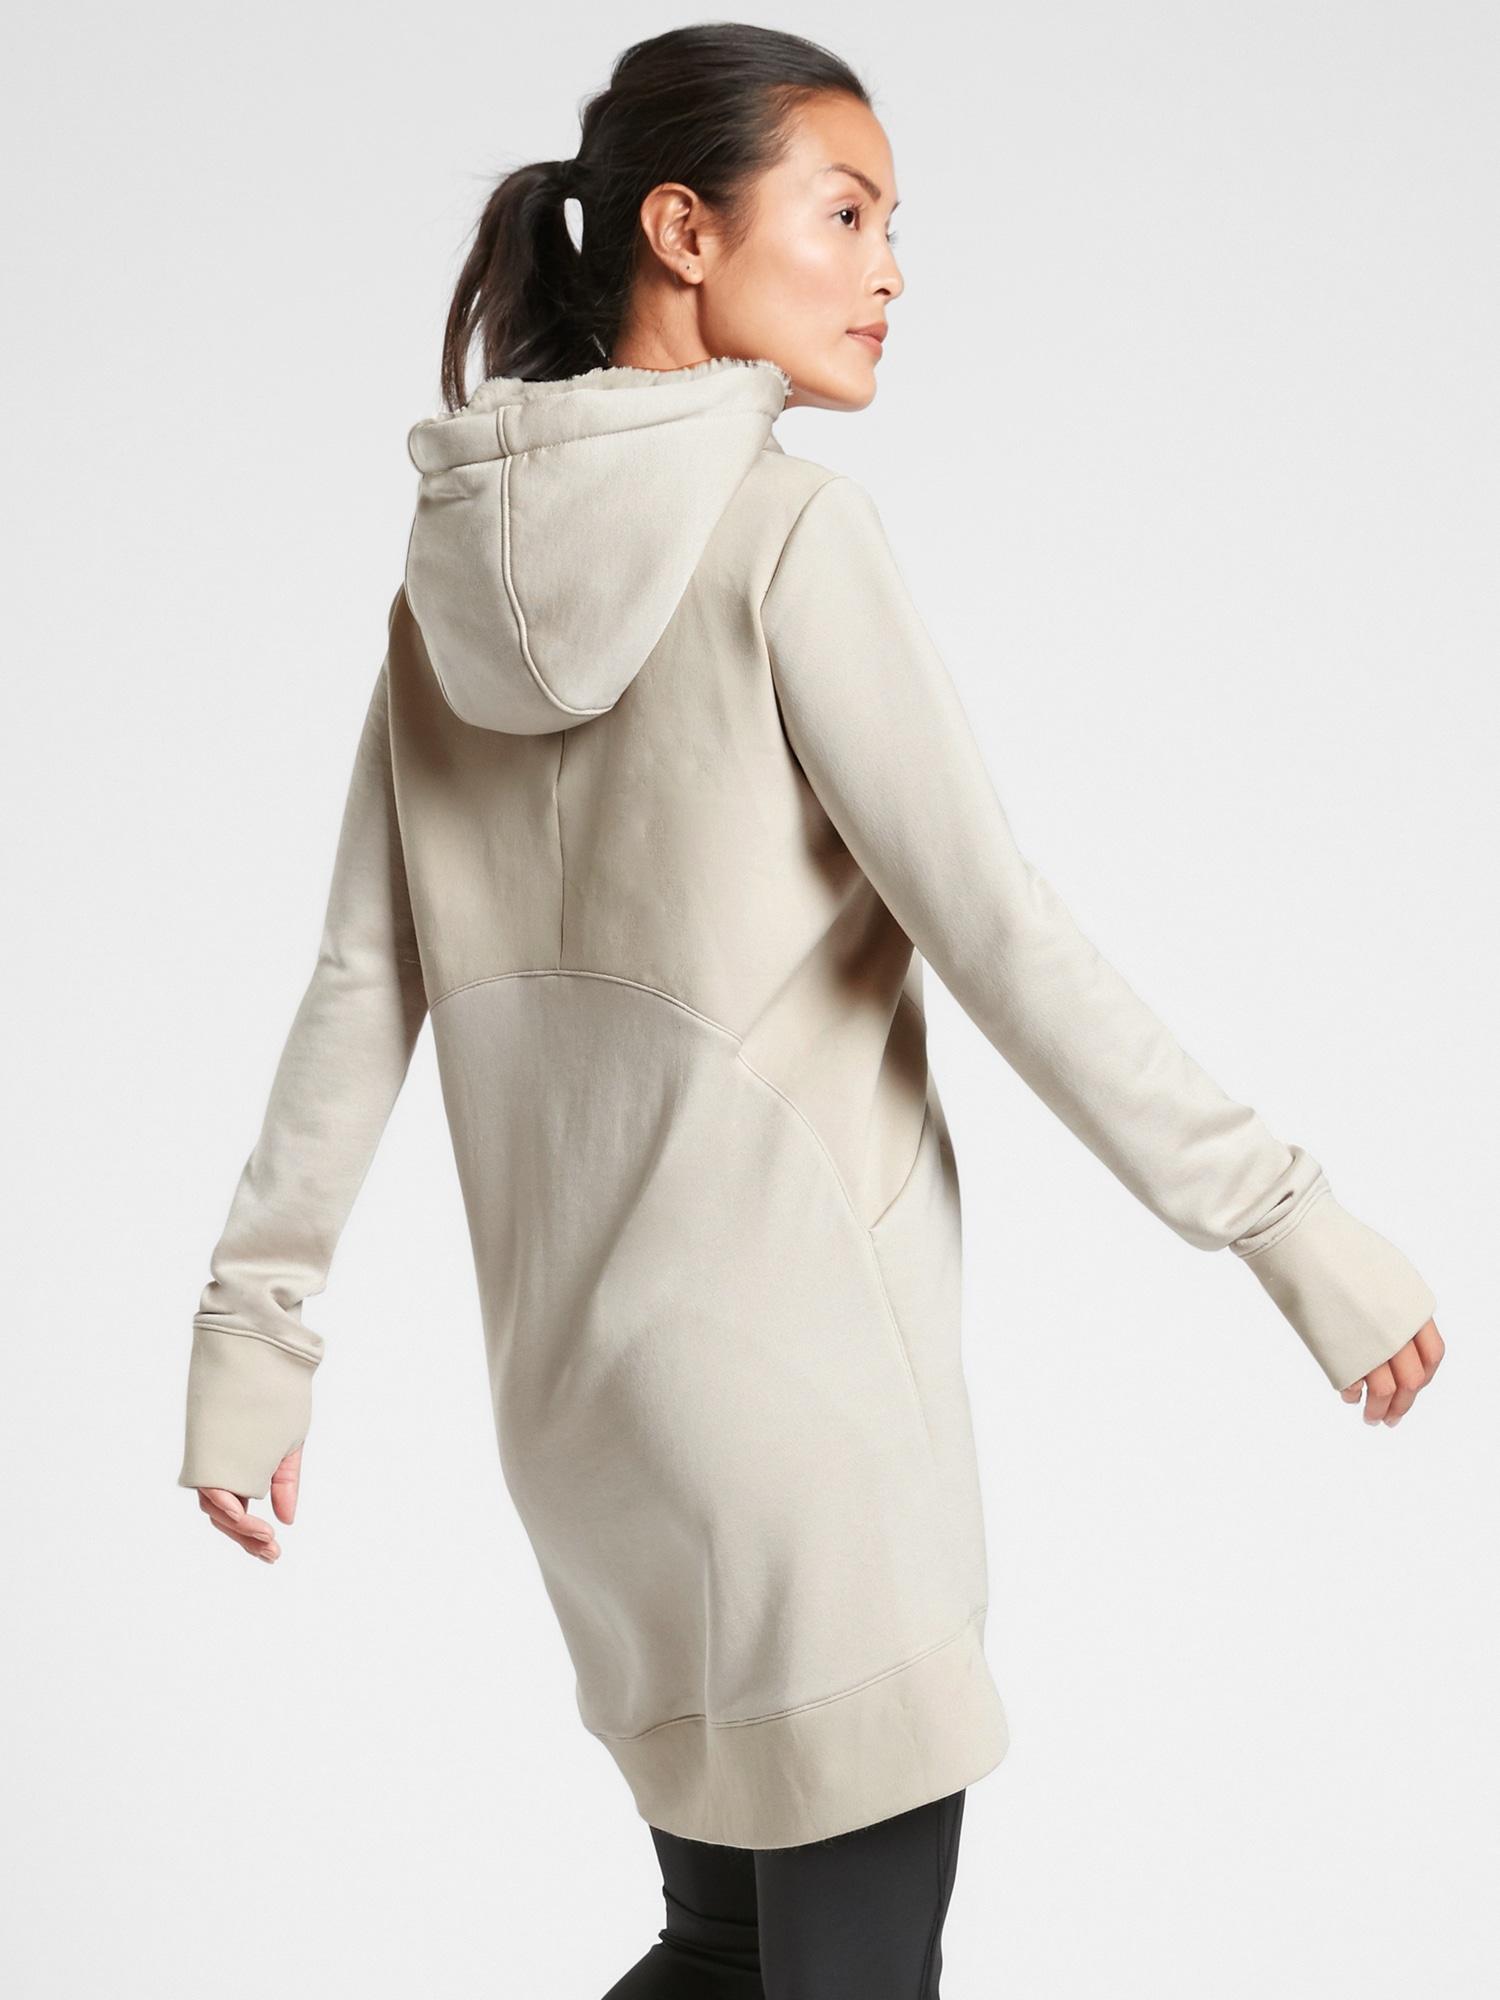 Athleta Triumph Luxe Shine Hoodie Clearance, 53% OFF | www.slyderstavern.com